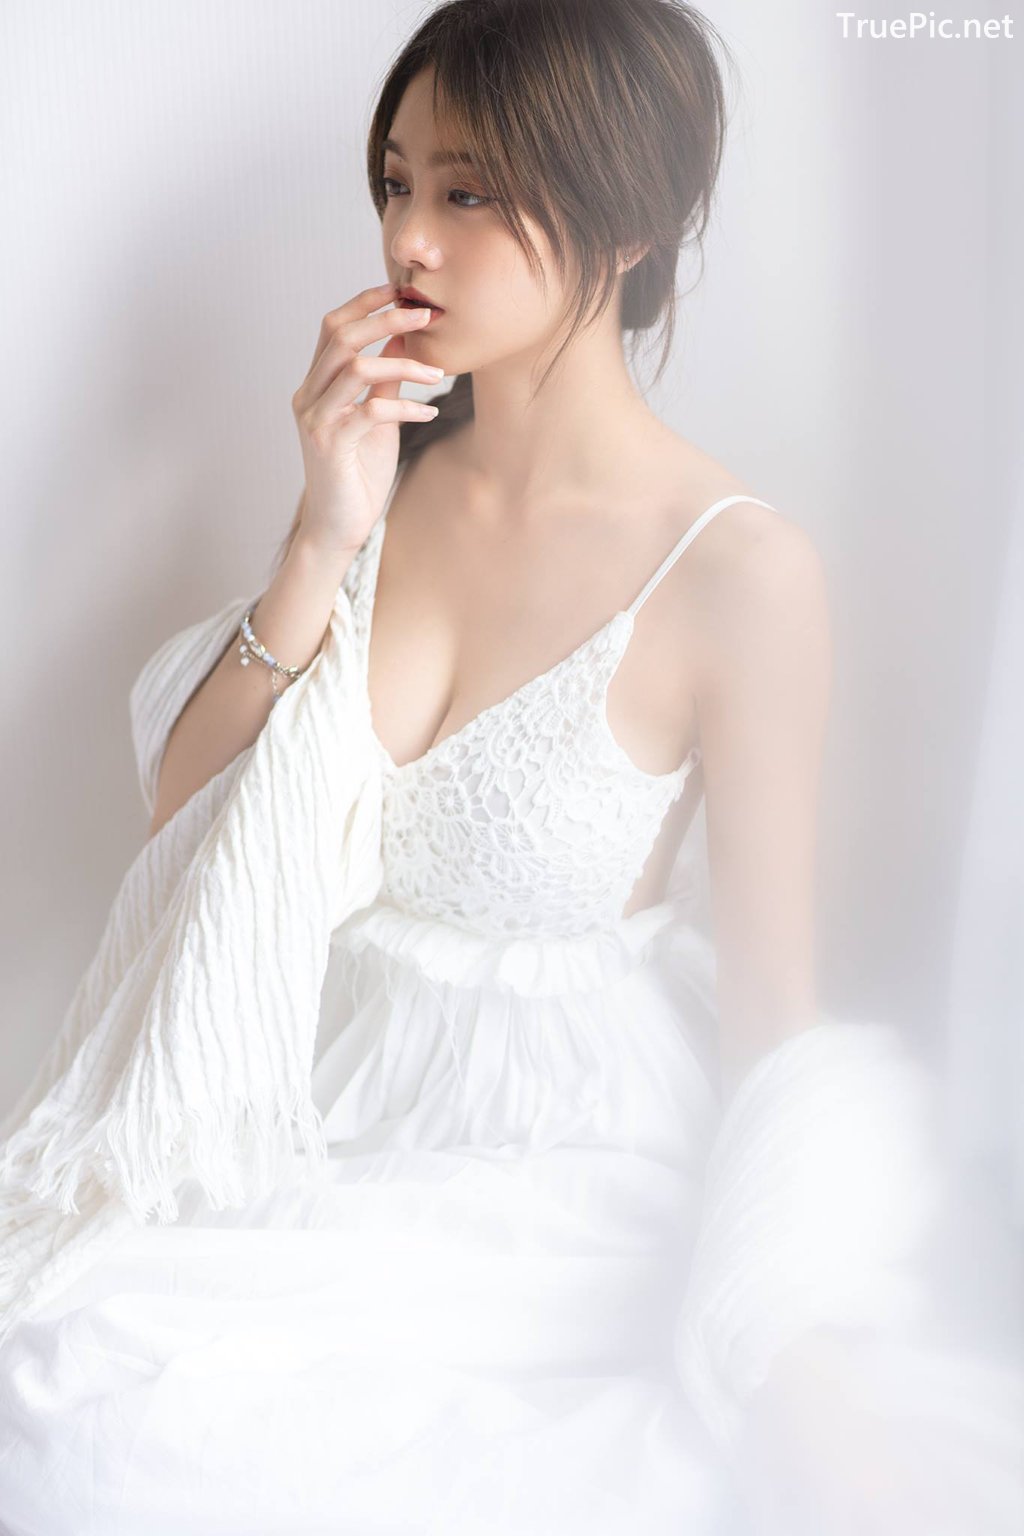 Image Thailand Model - Pimploy Chitranapawong - Beautiful In White - TruePic.net - Picture-18